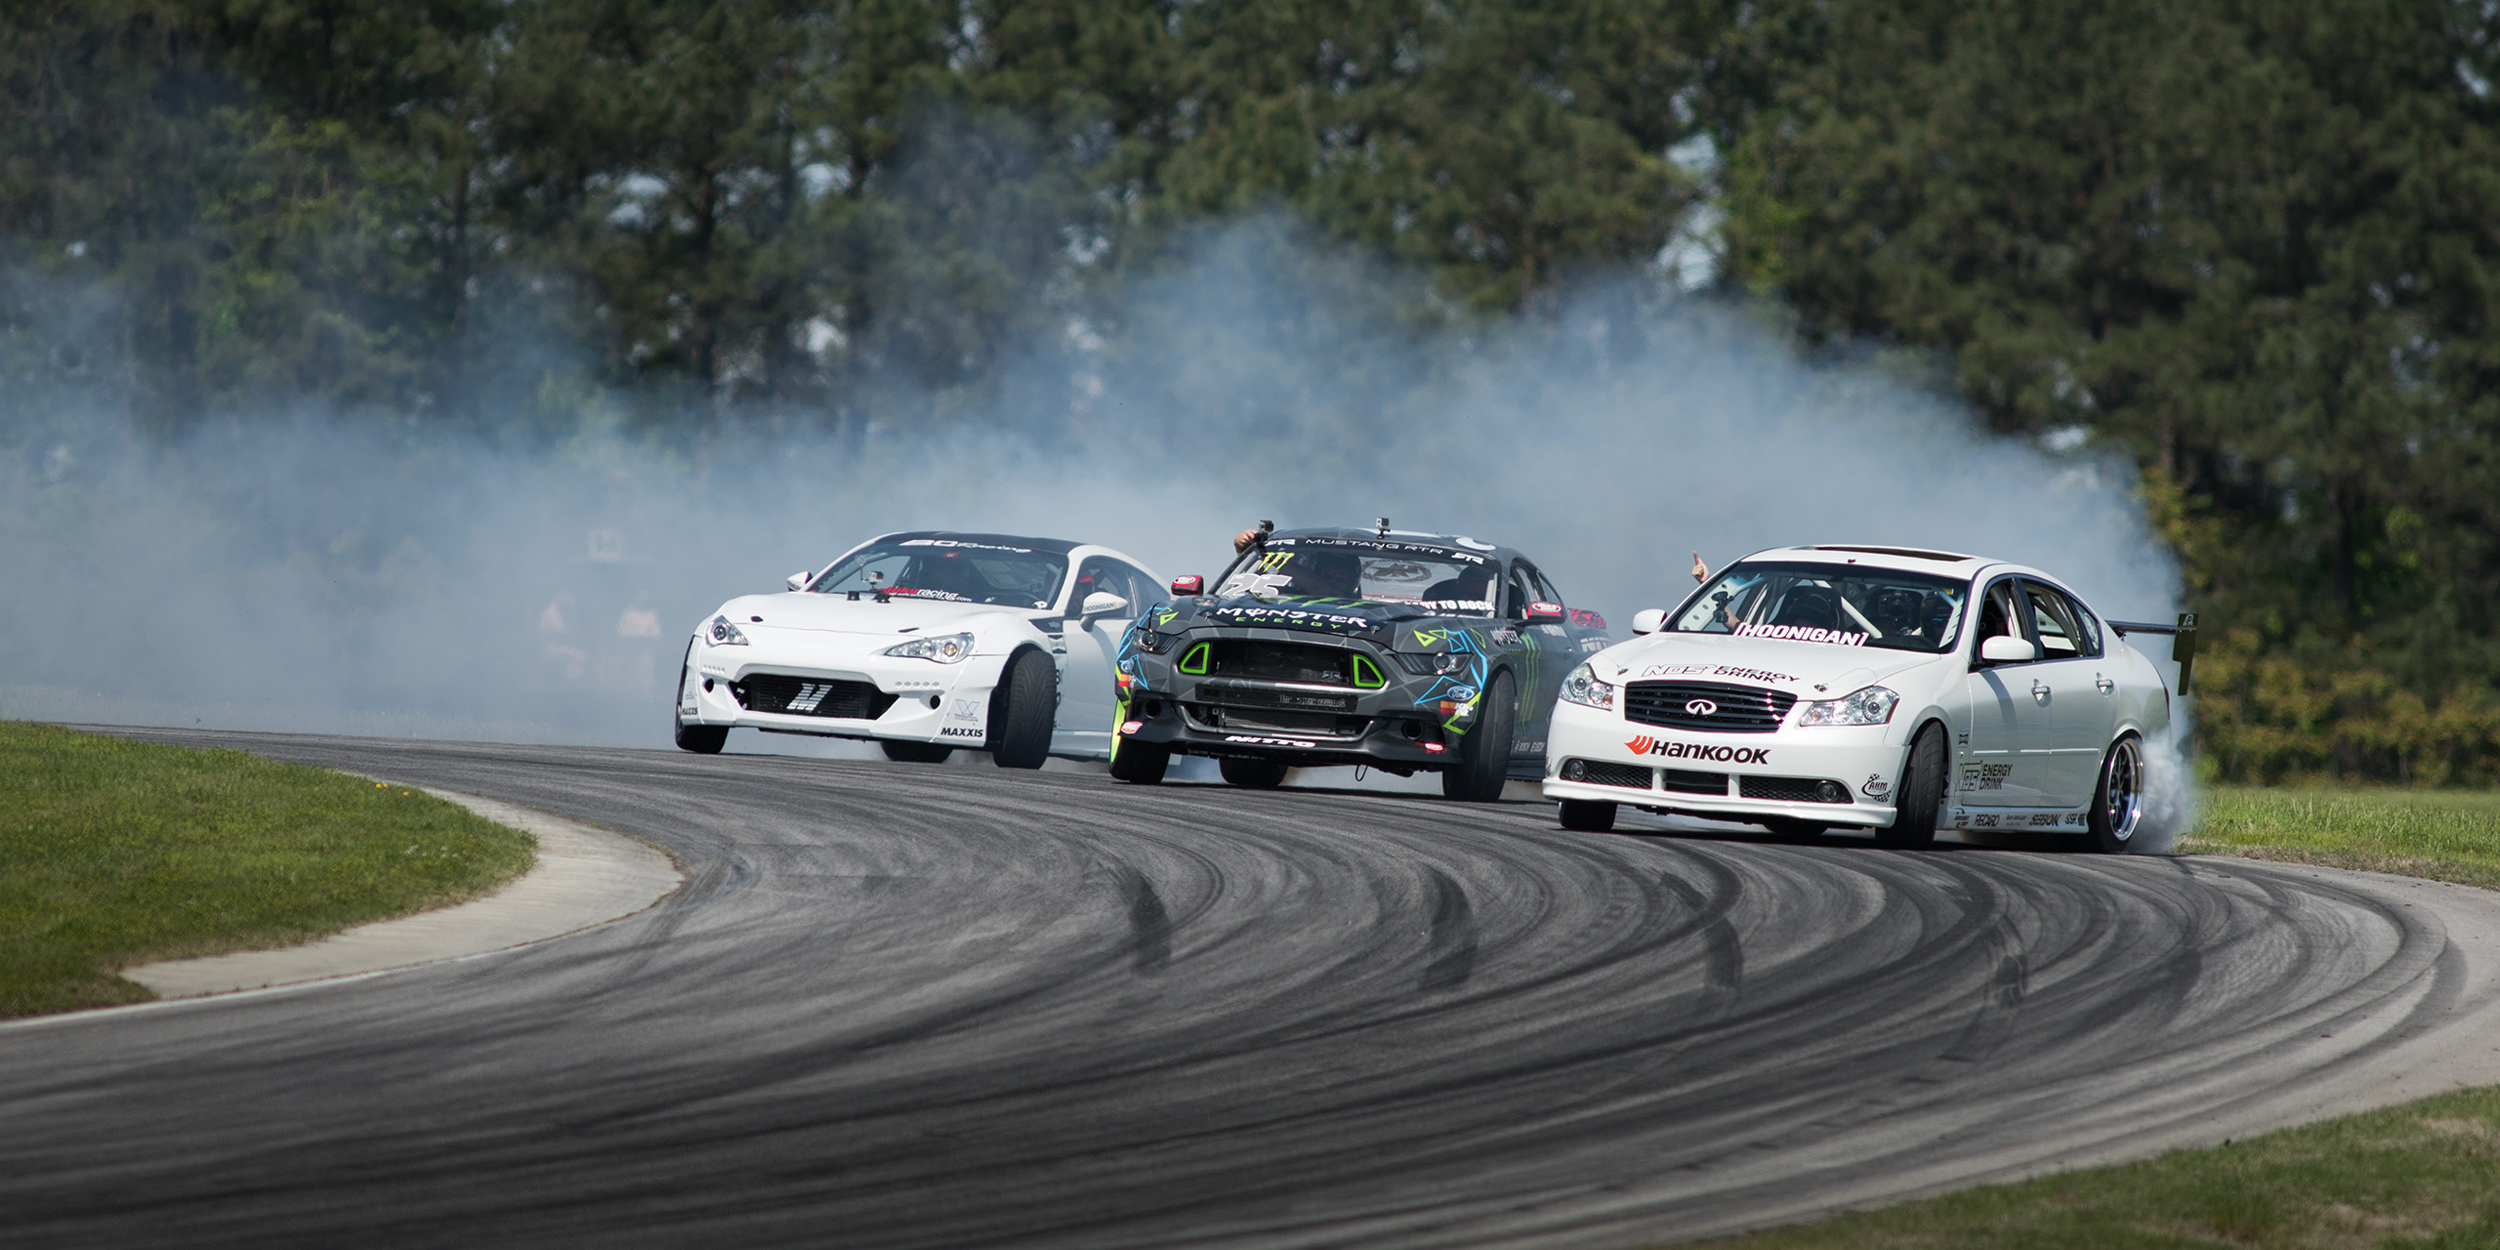 Festival of Speed Drift Ride-Alongs  Autobahn Country Club - Member Site